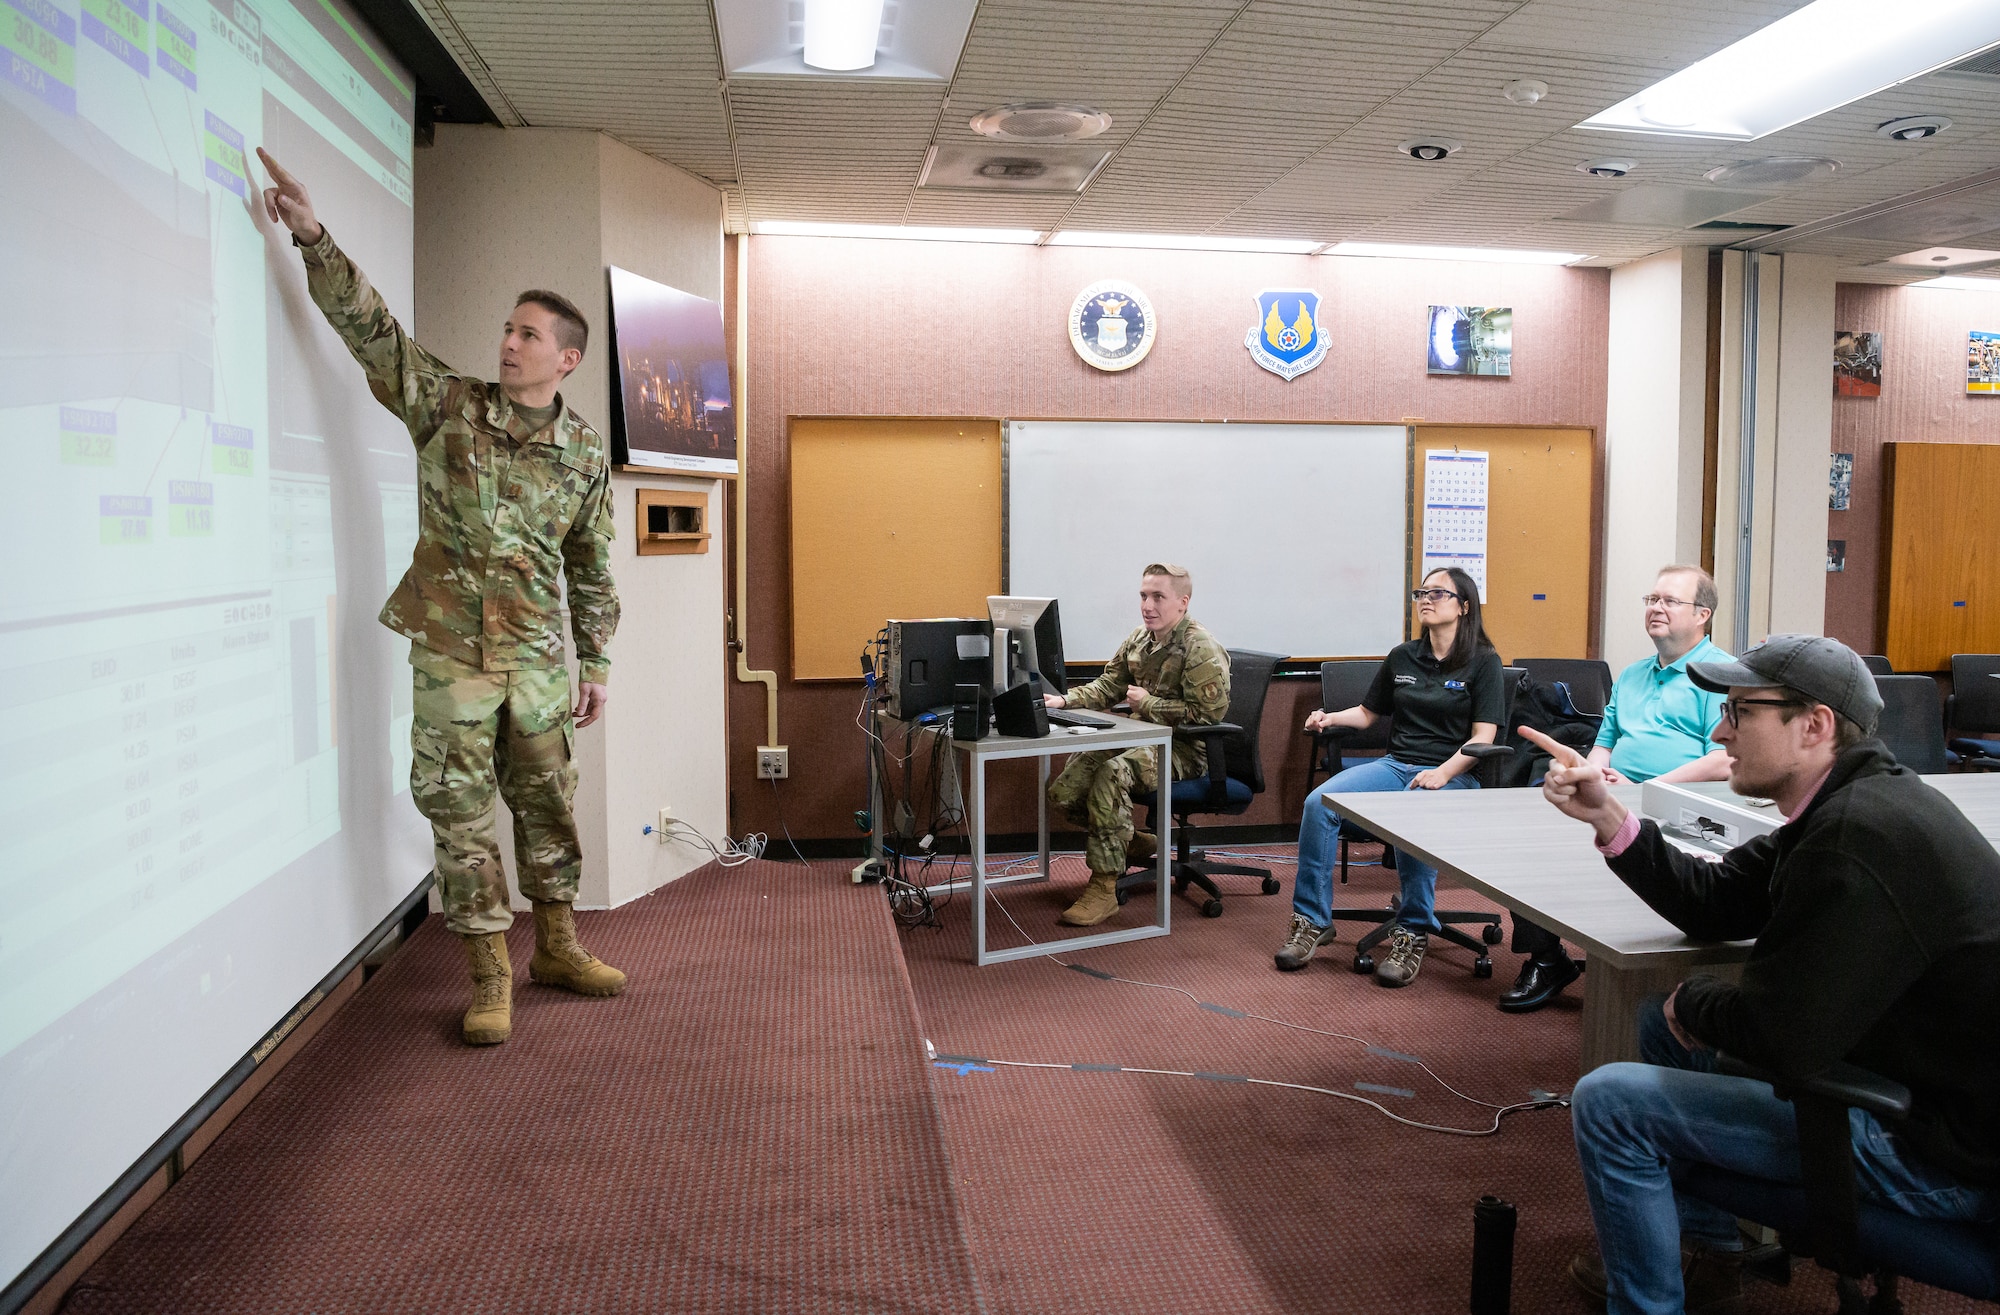 Airman pointing to screen as four other people look